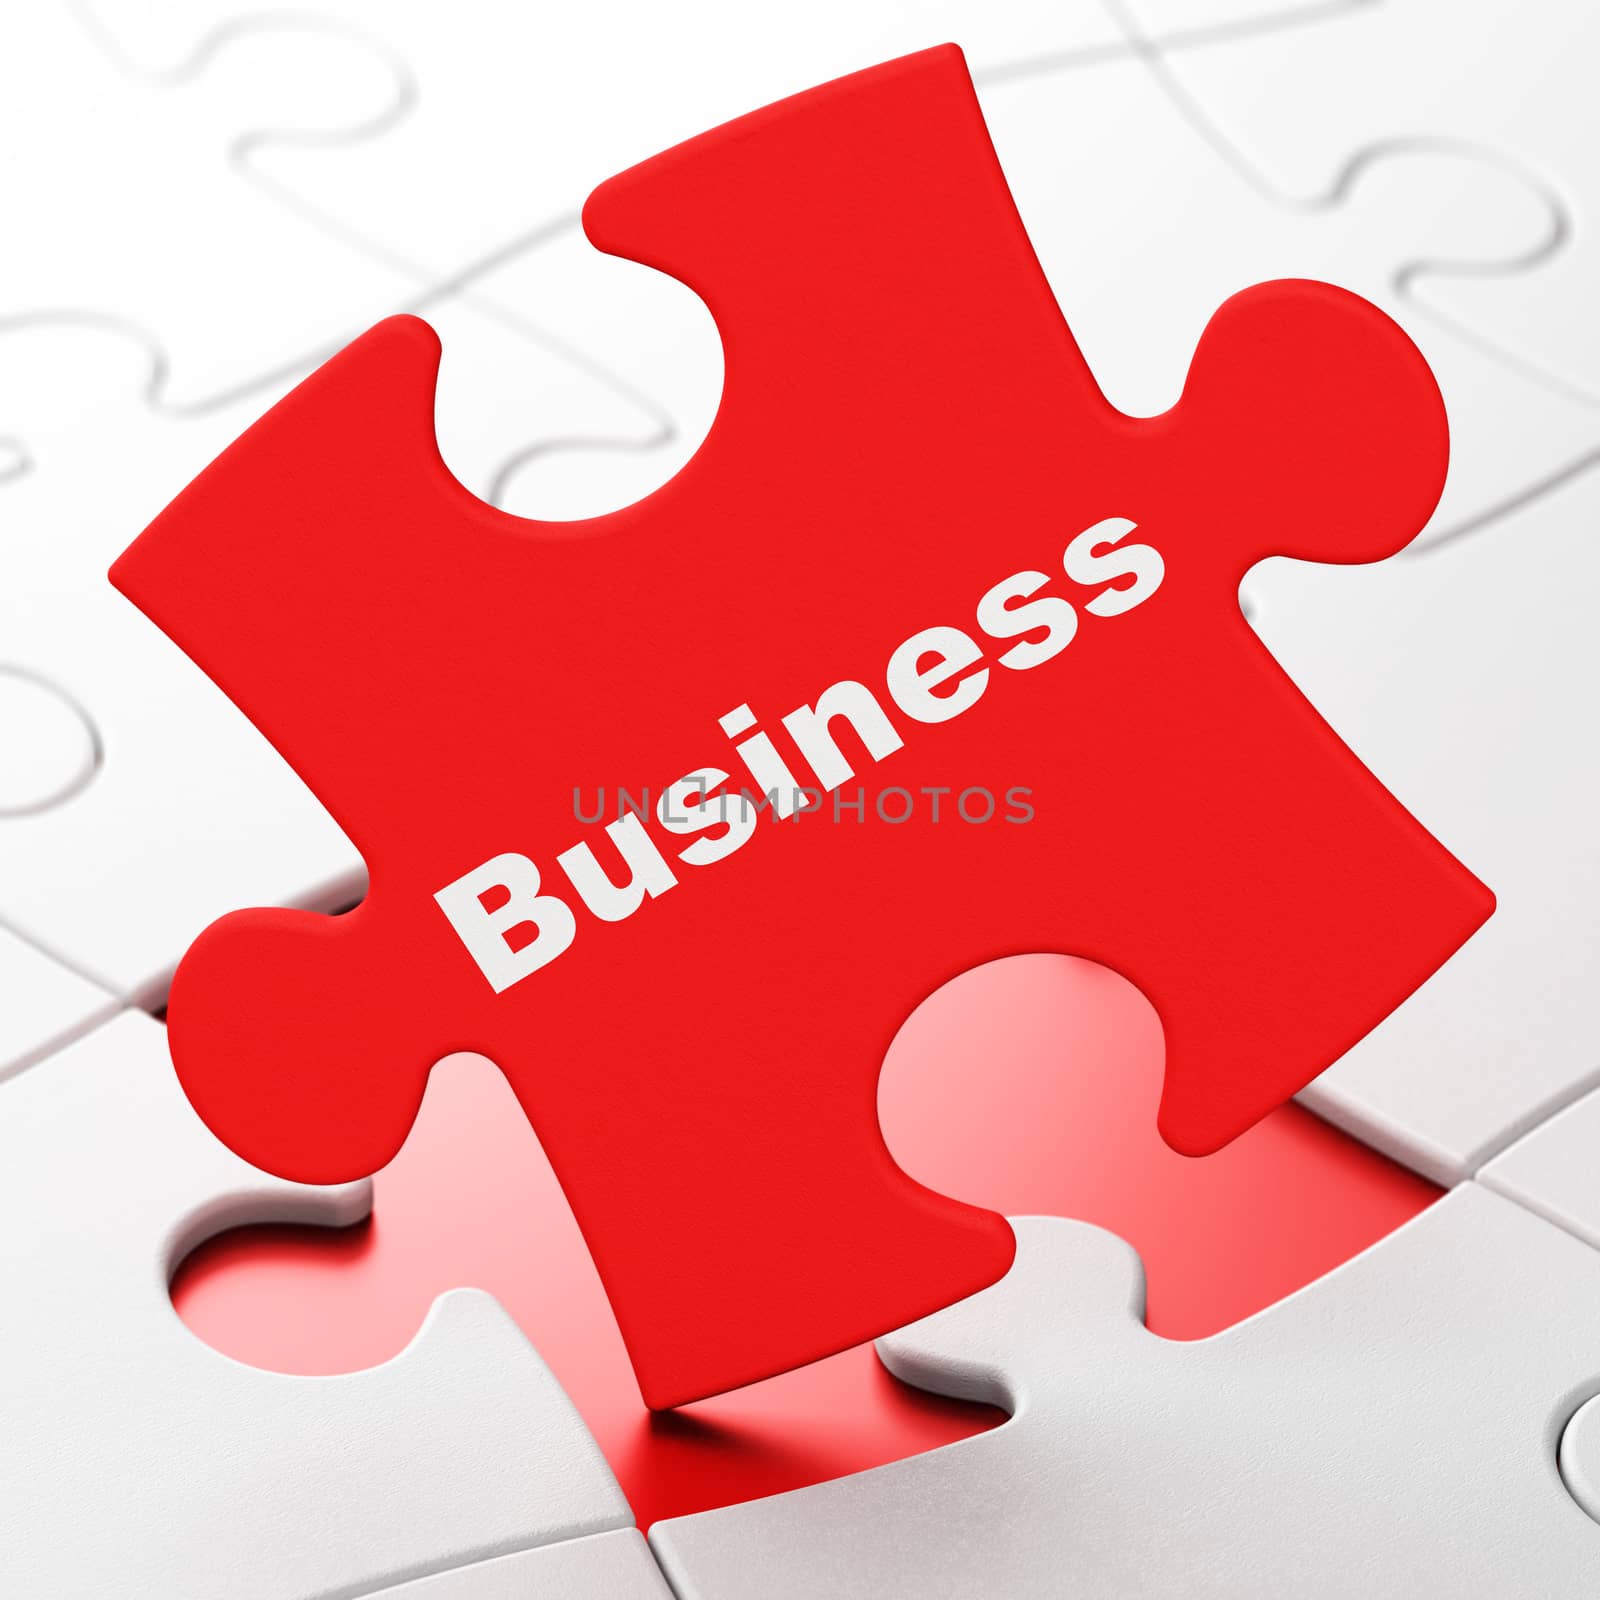 Business concept: Business on puzzle background by maxkabakov